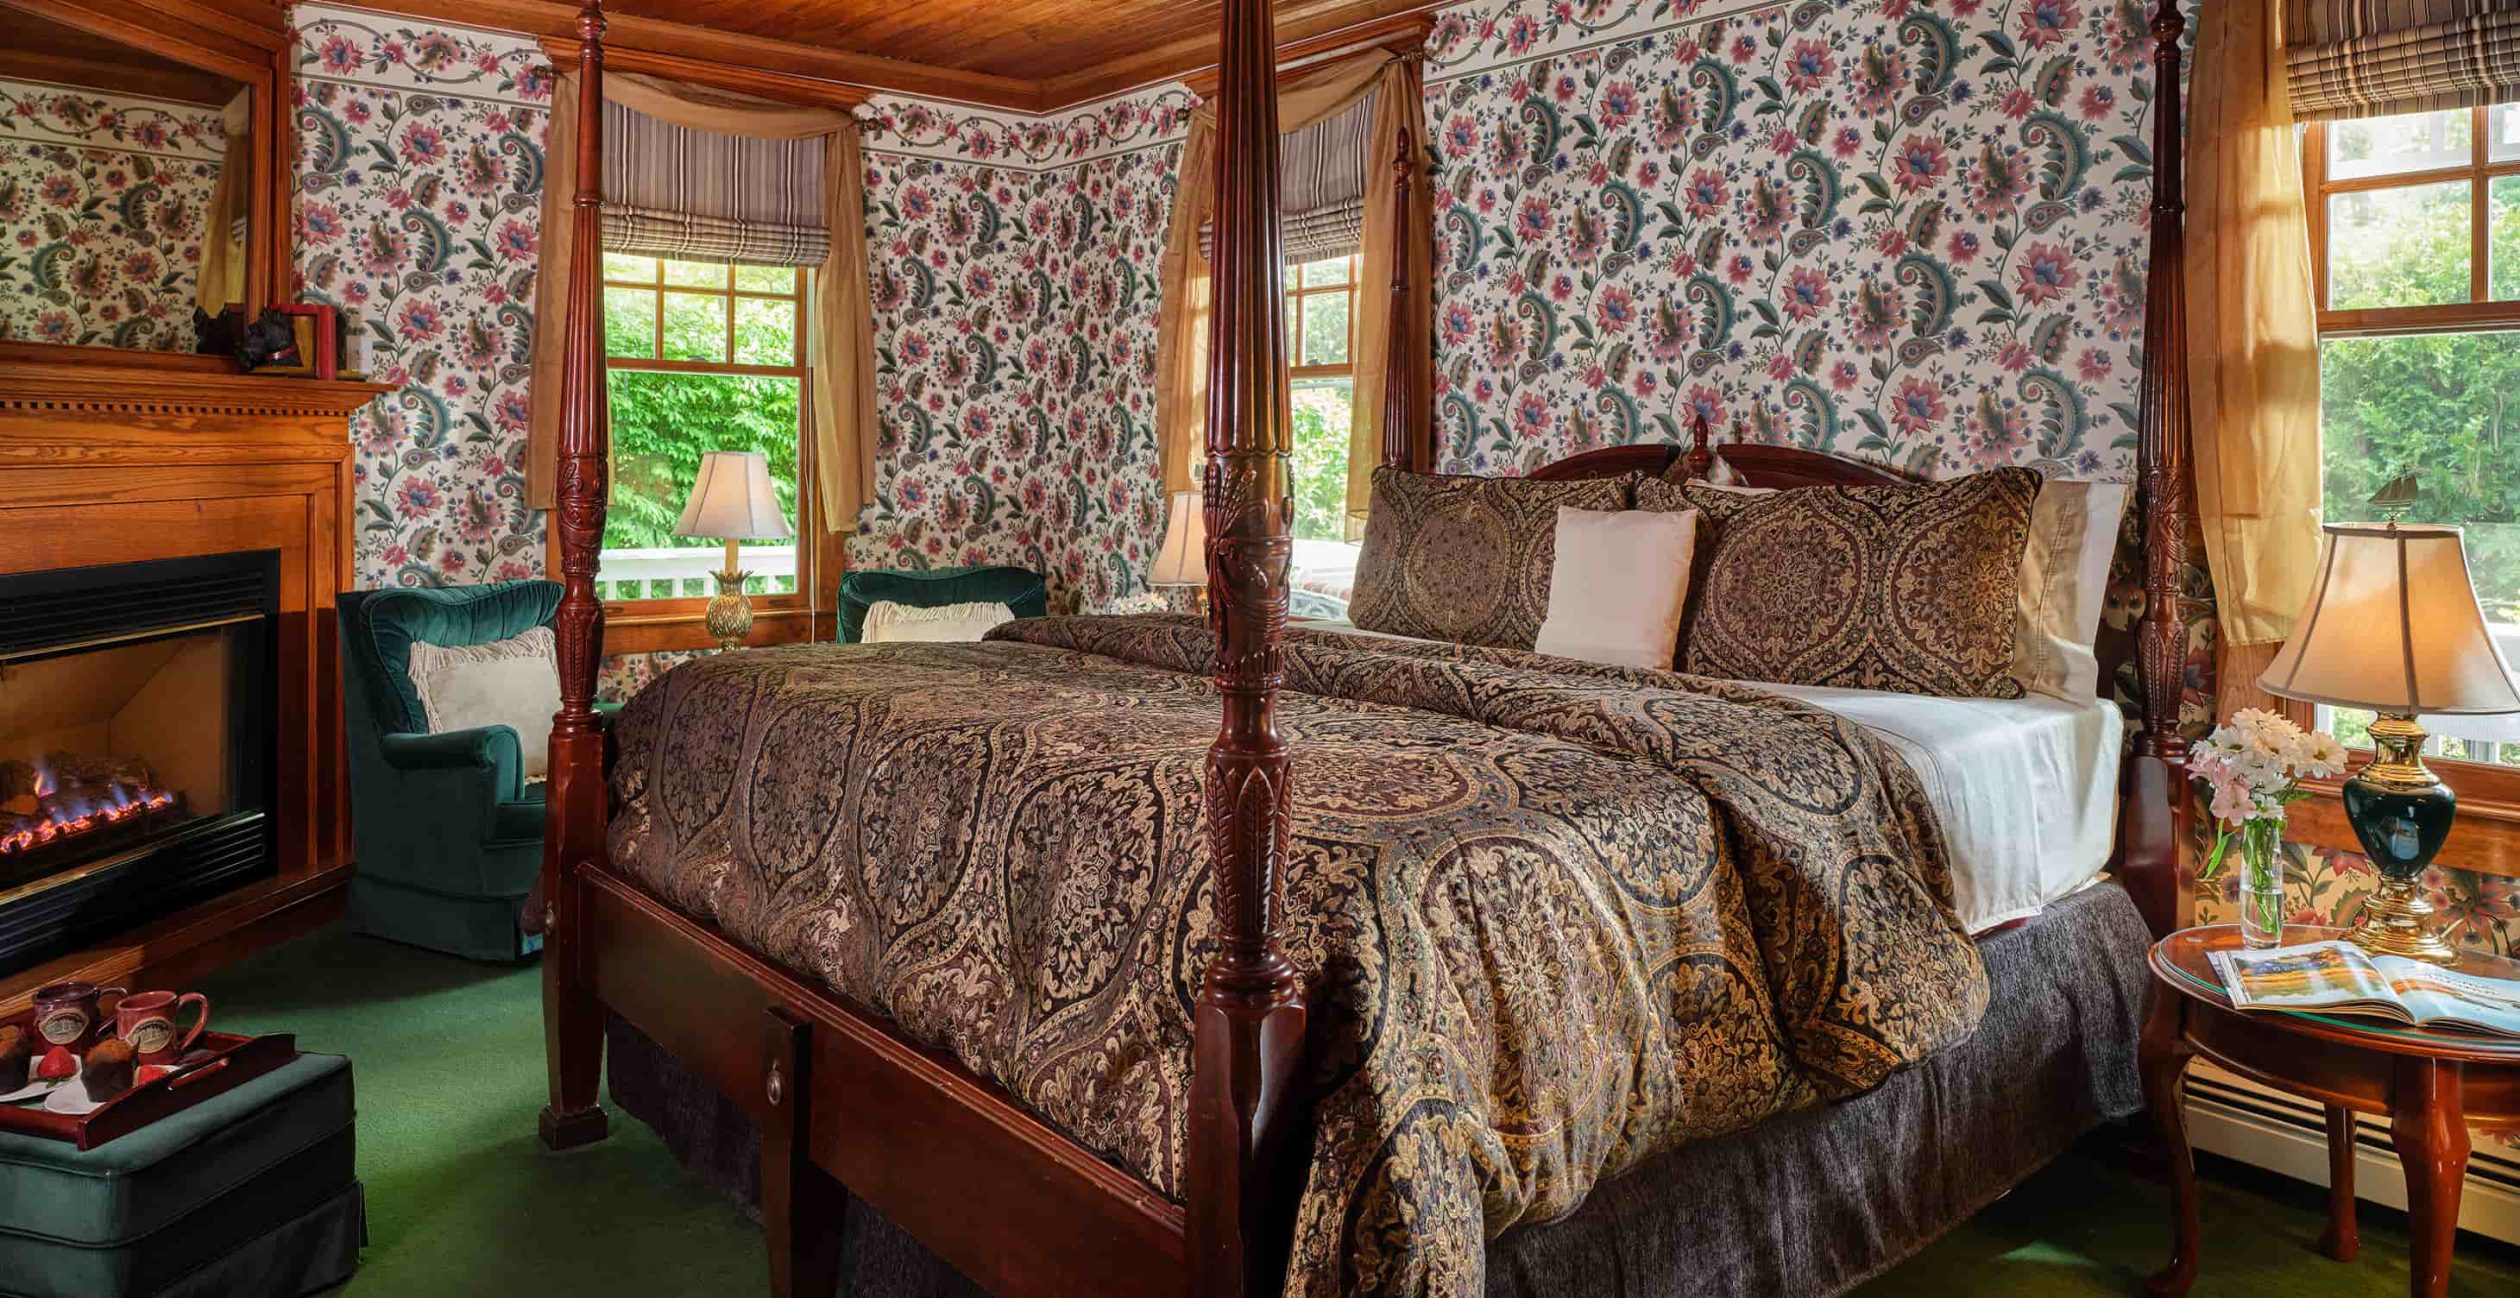 Theodore Roosevelt Room bed